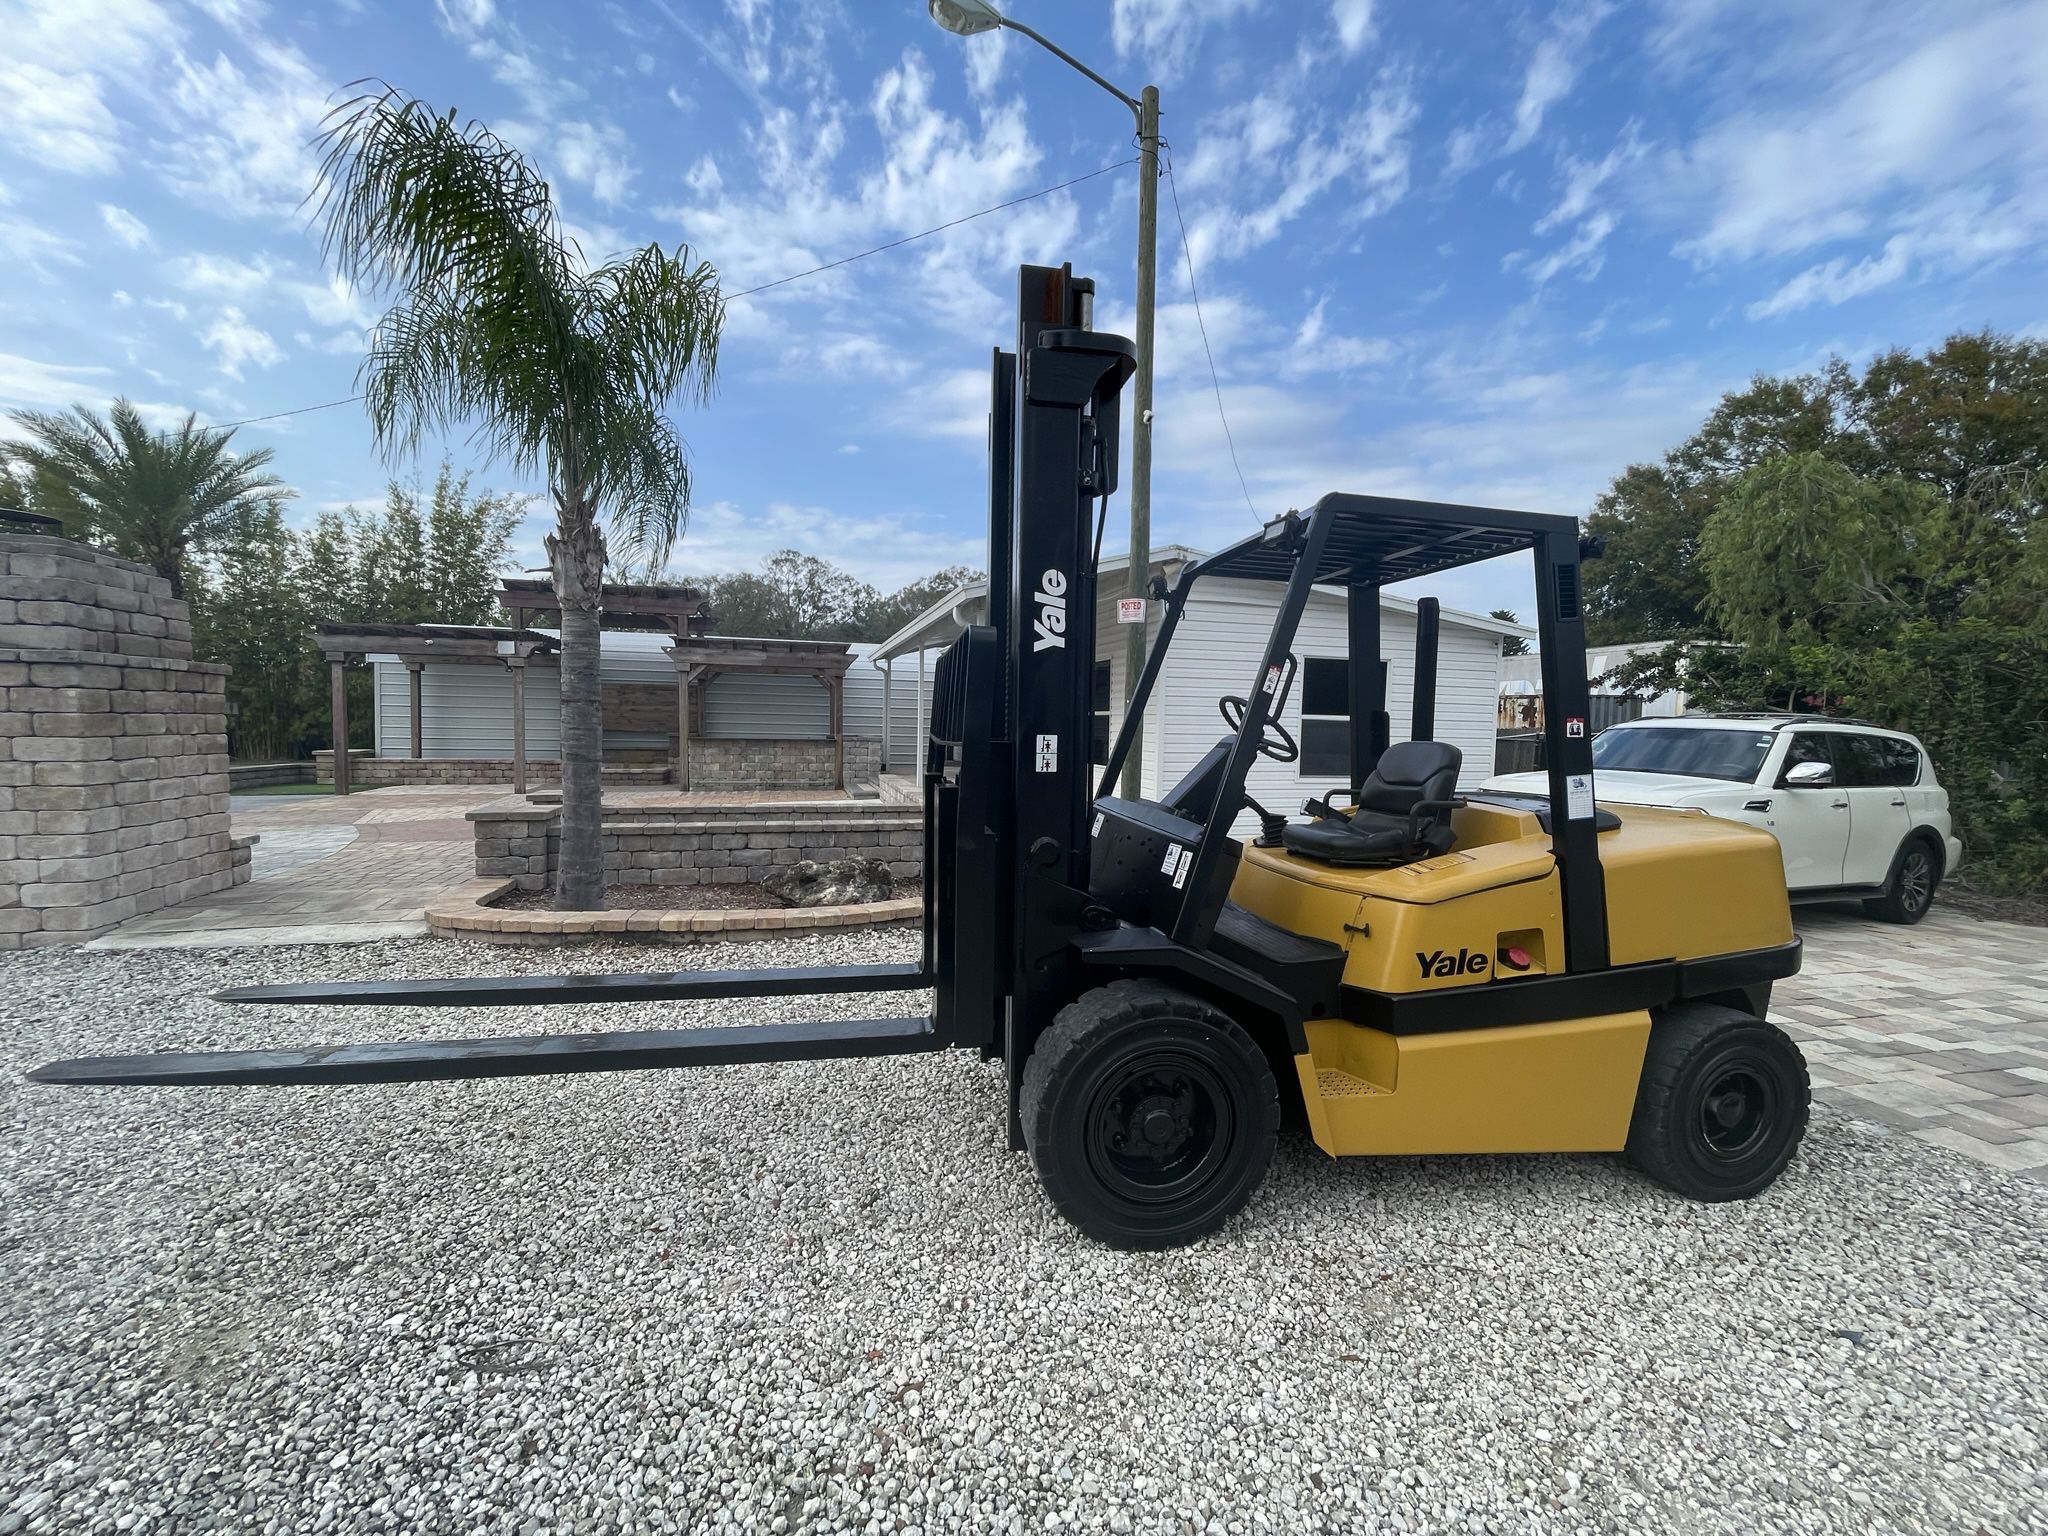 YALE DIESEL FORKLIFT 10000 LBS LOAD CAPACITY SELL OR TRADE 